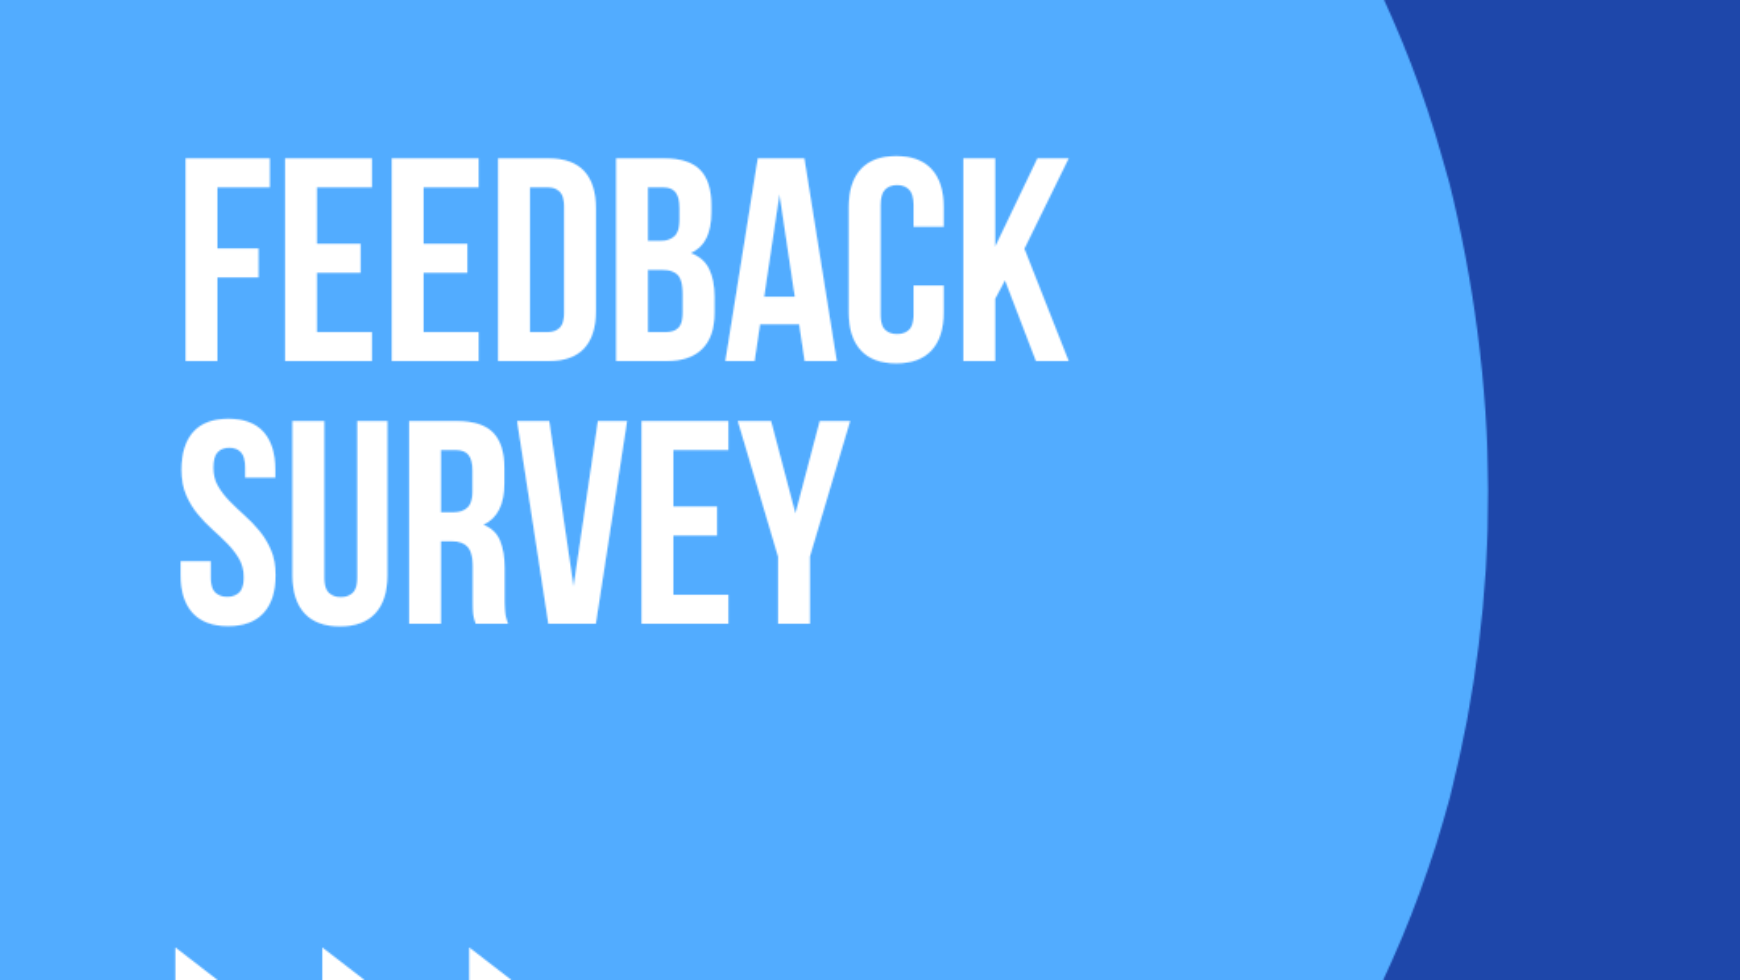 Our CHAT Survey is now available!